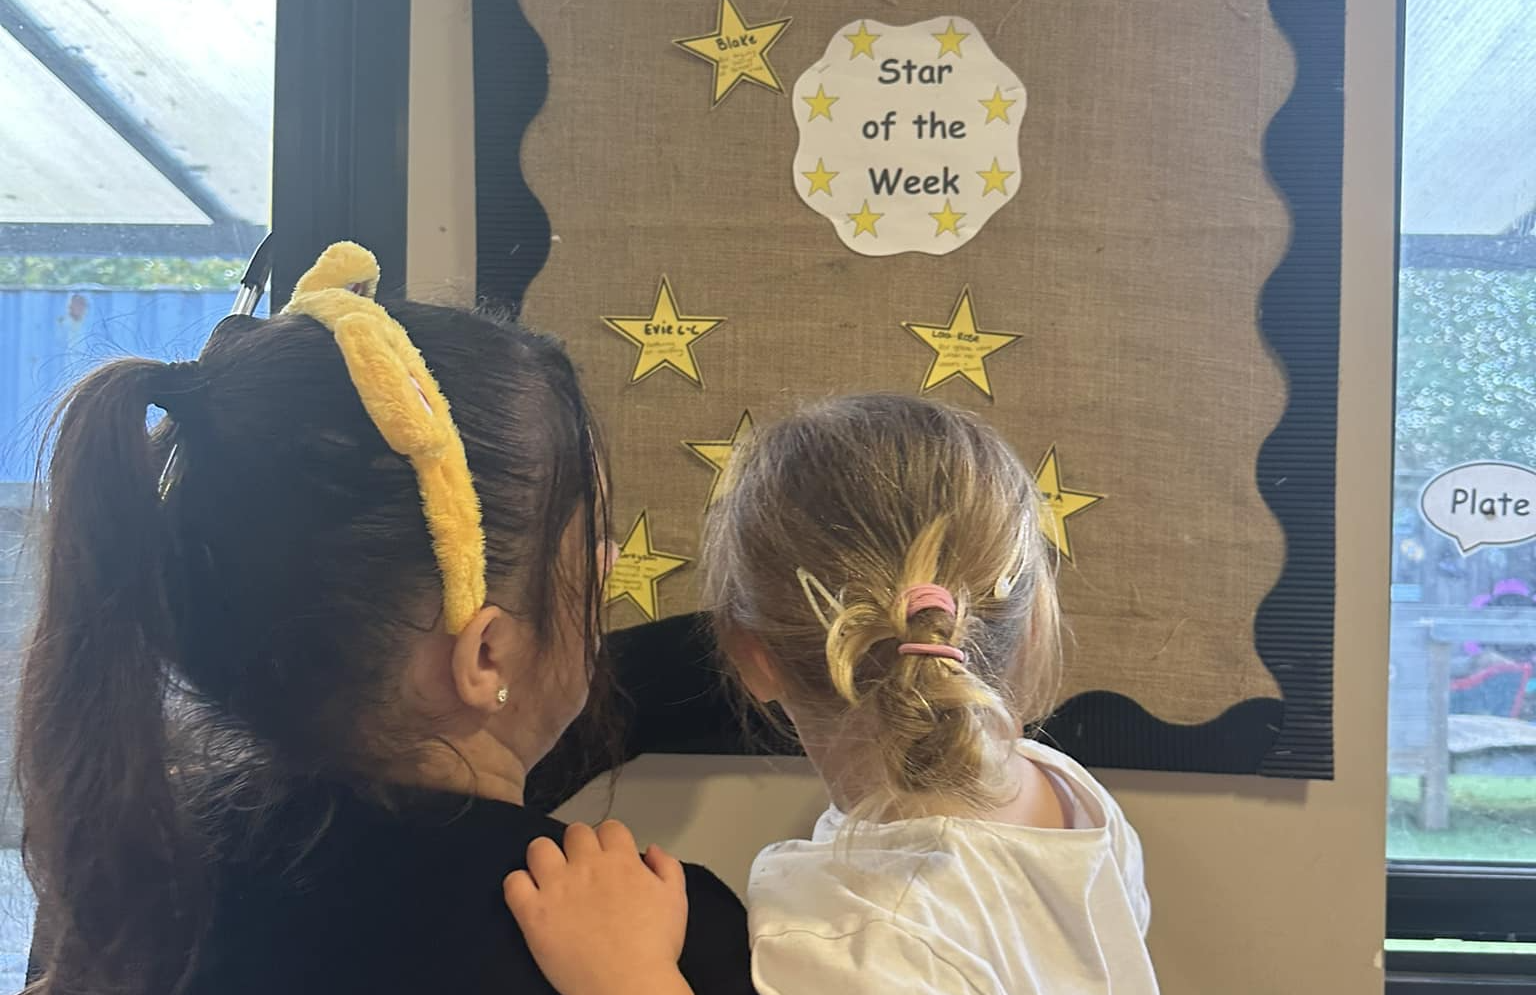 Children looking at star of the week board